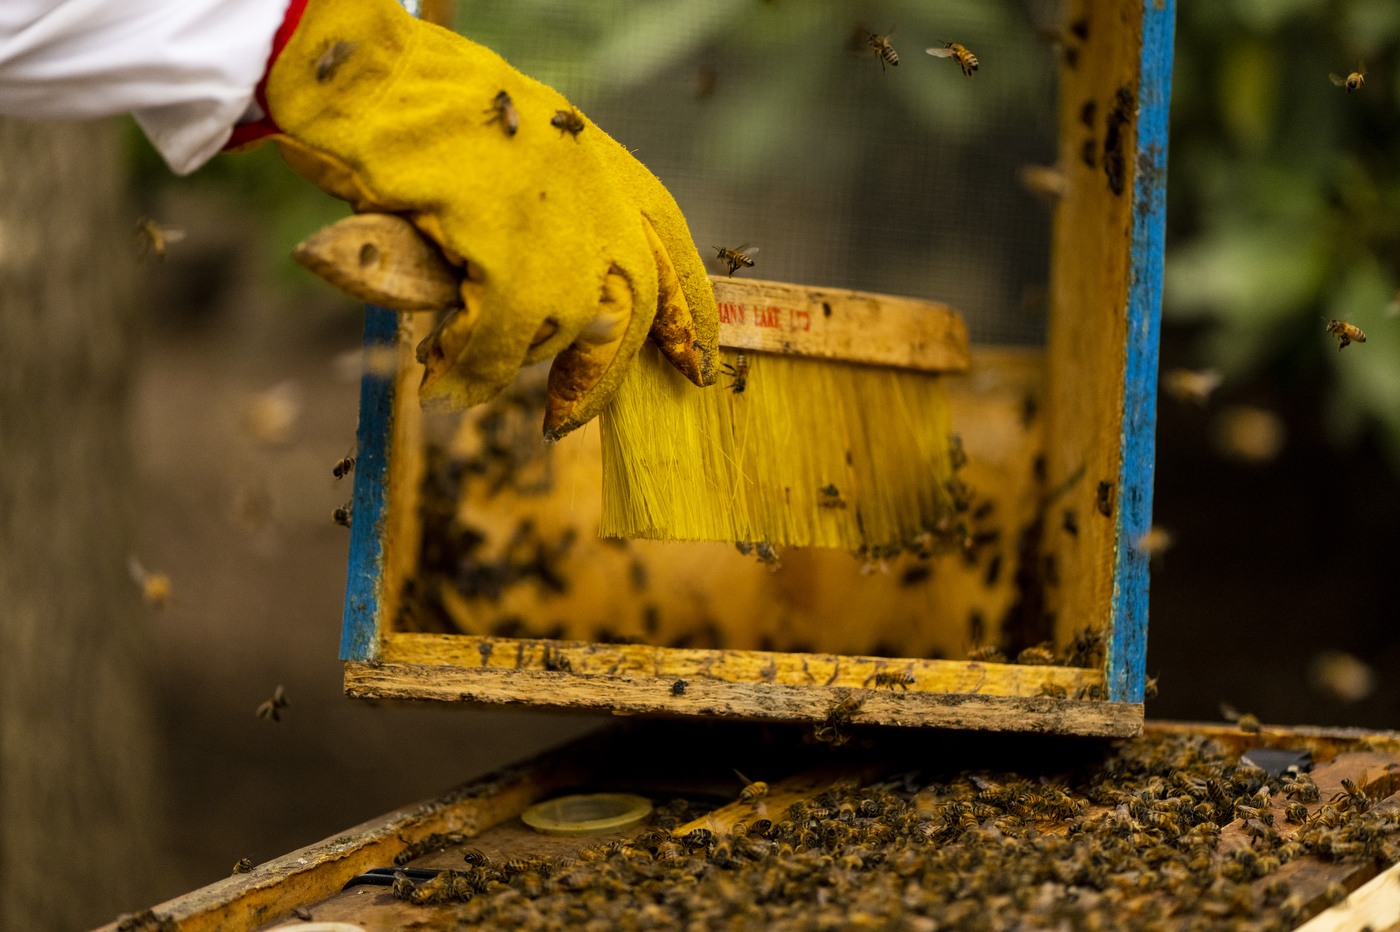 Katherine Antos uses a brush to tend to a hive of bees.